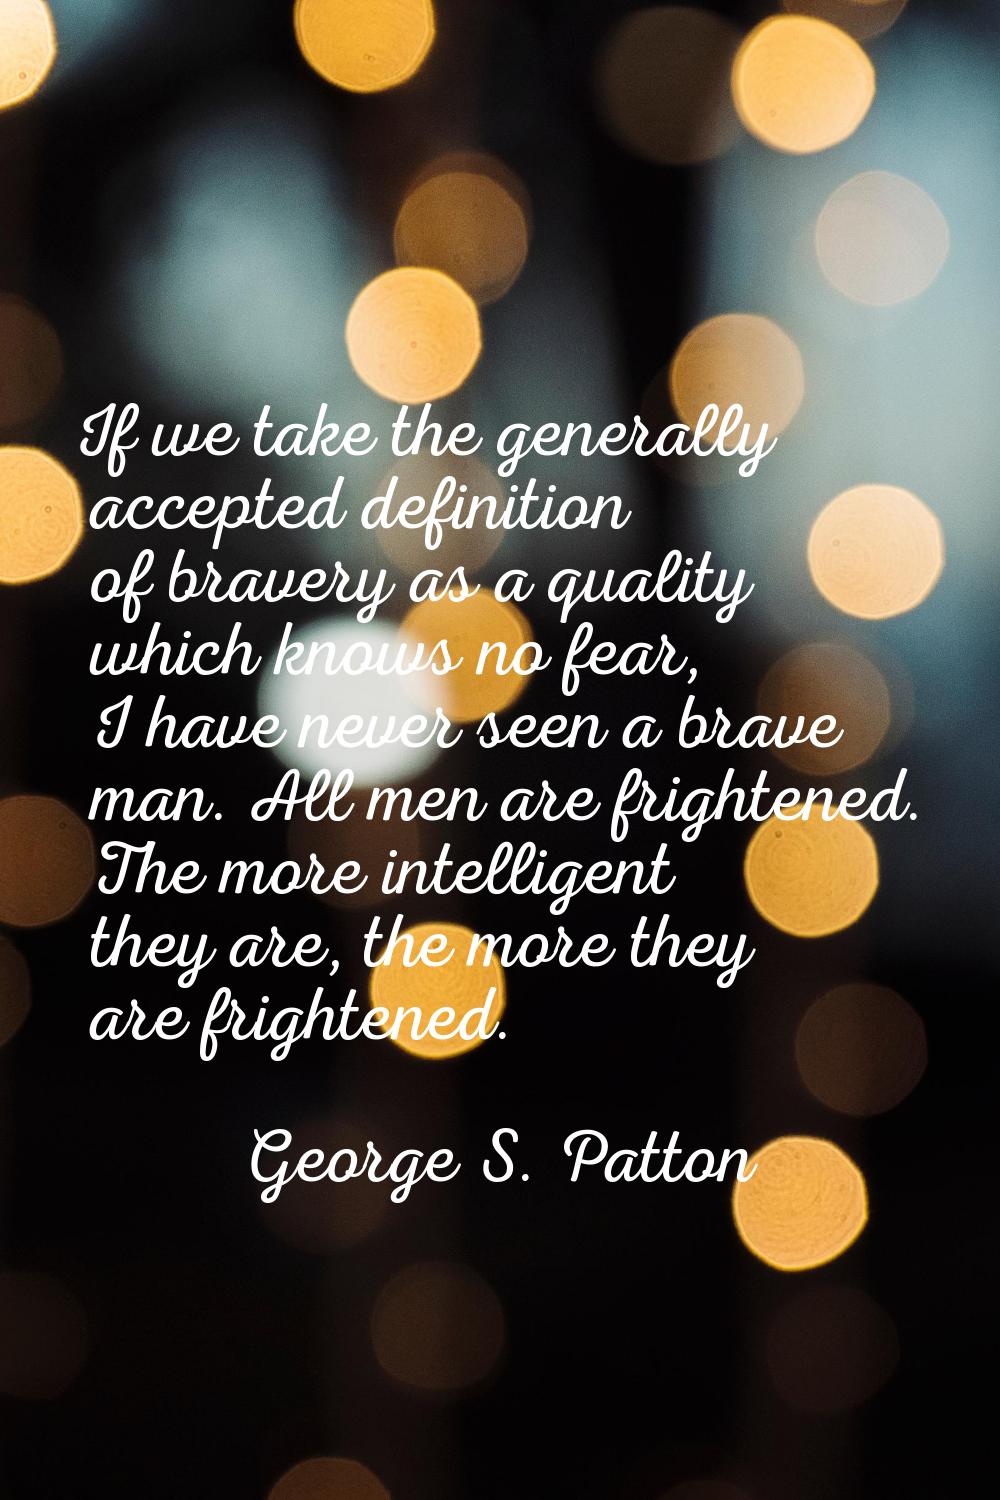 If we take the generally accepted definition of bravery as a quality which knows no fear, I have ne